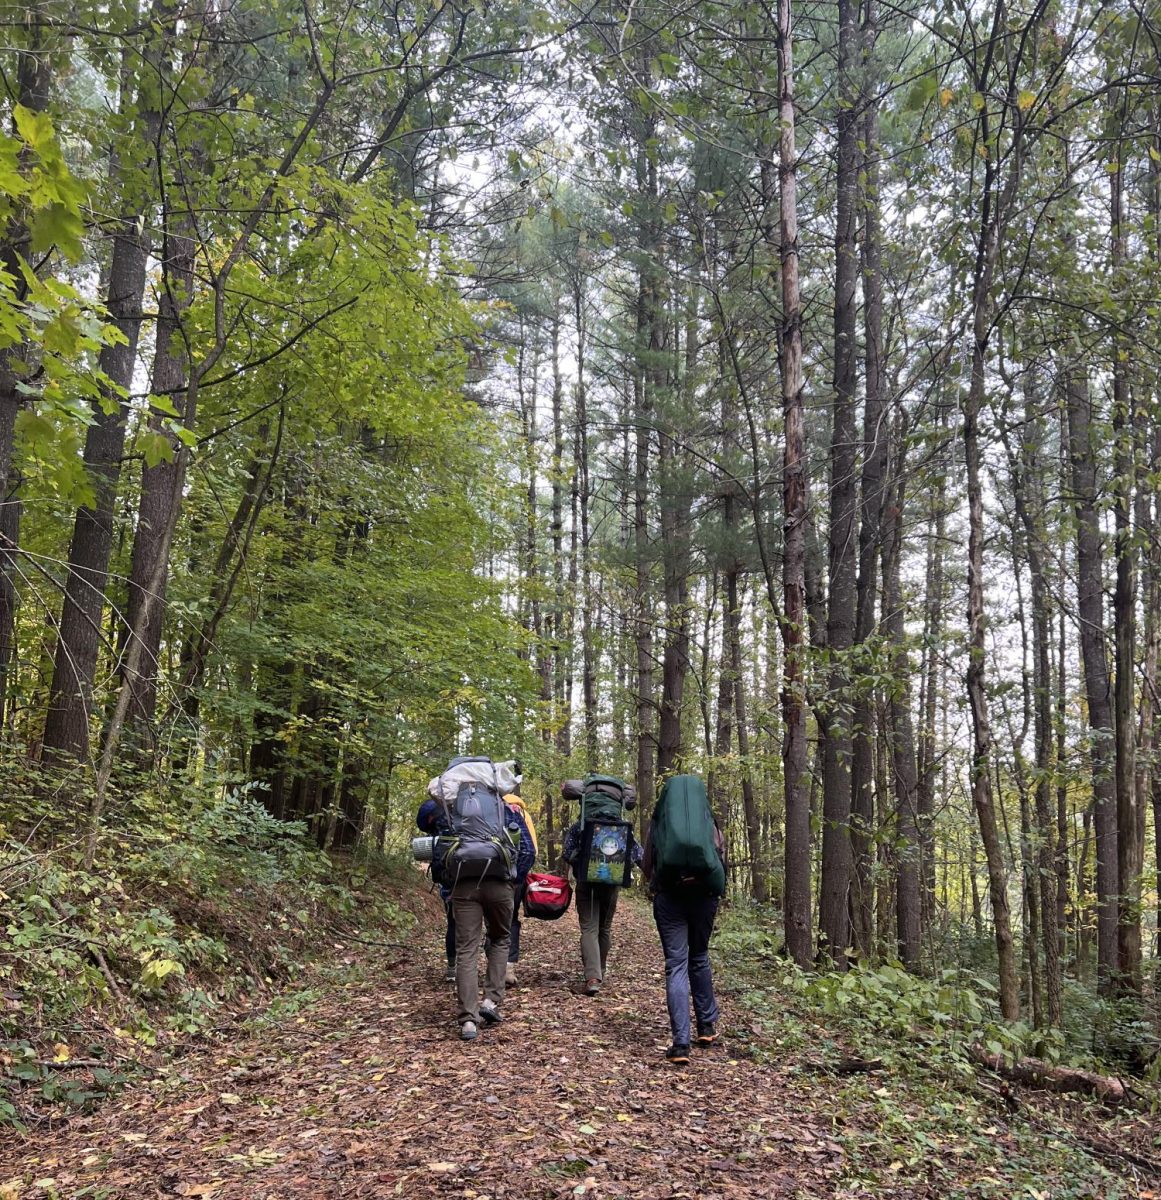 Students backpack through a tall stand of pine trees to their campsite in Yellow River State Forest, as part of a Fall Break camping trip organized by Luther Rec Services. Photo courtesy of Mara Pankow (26)